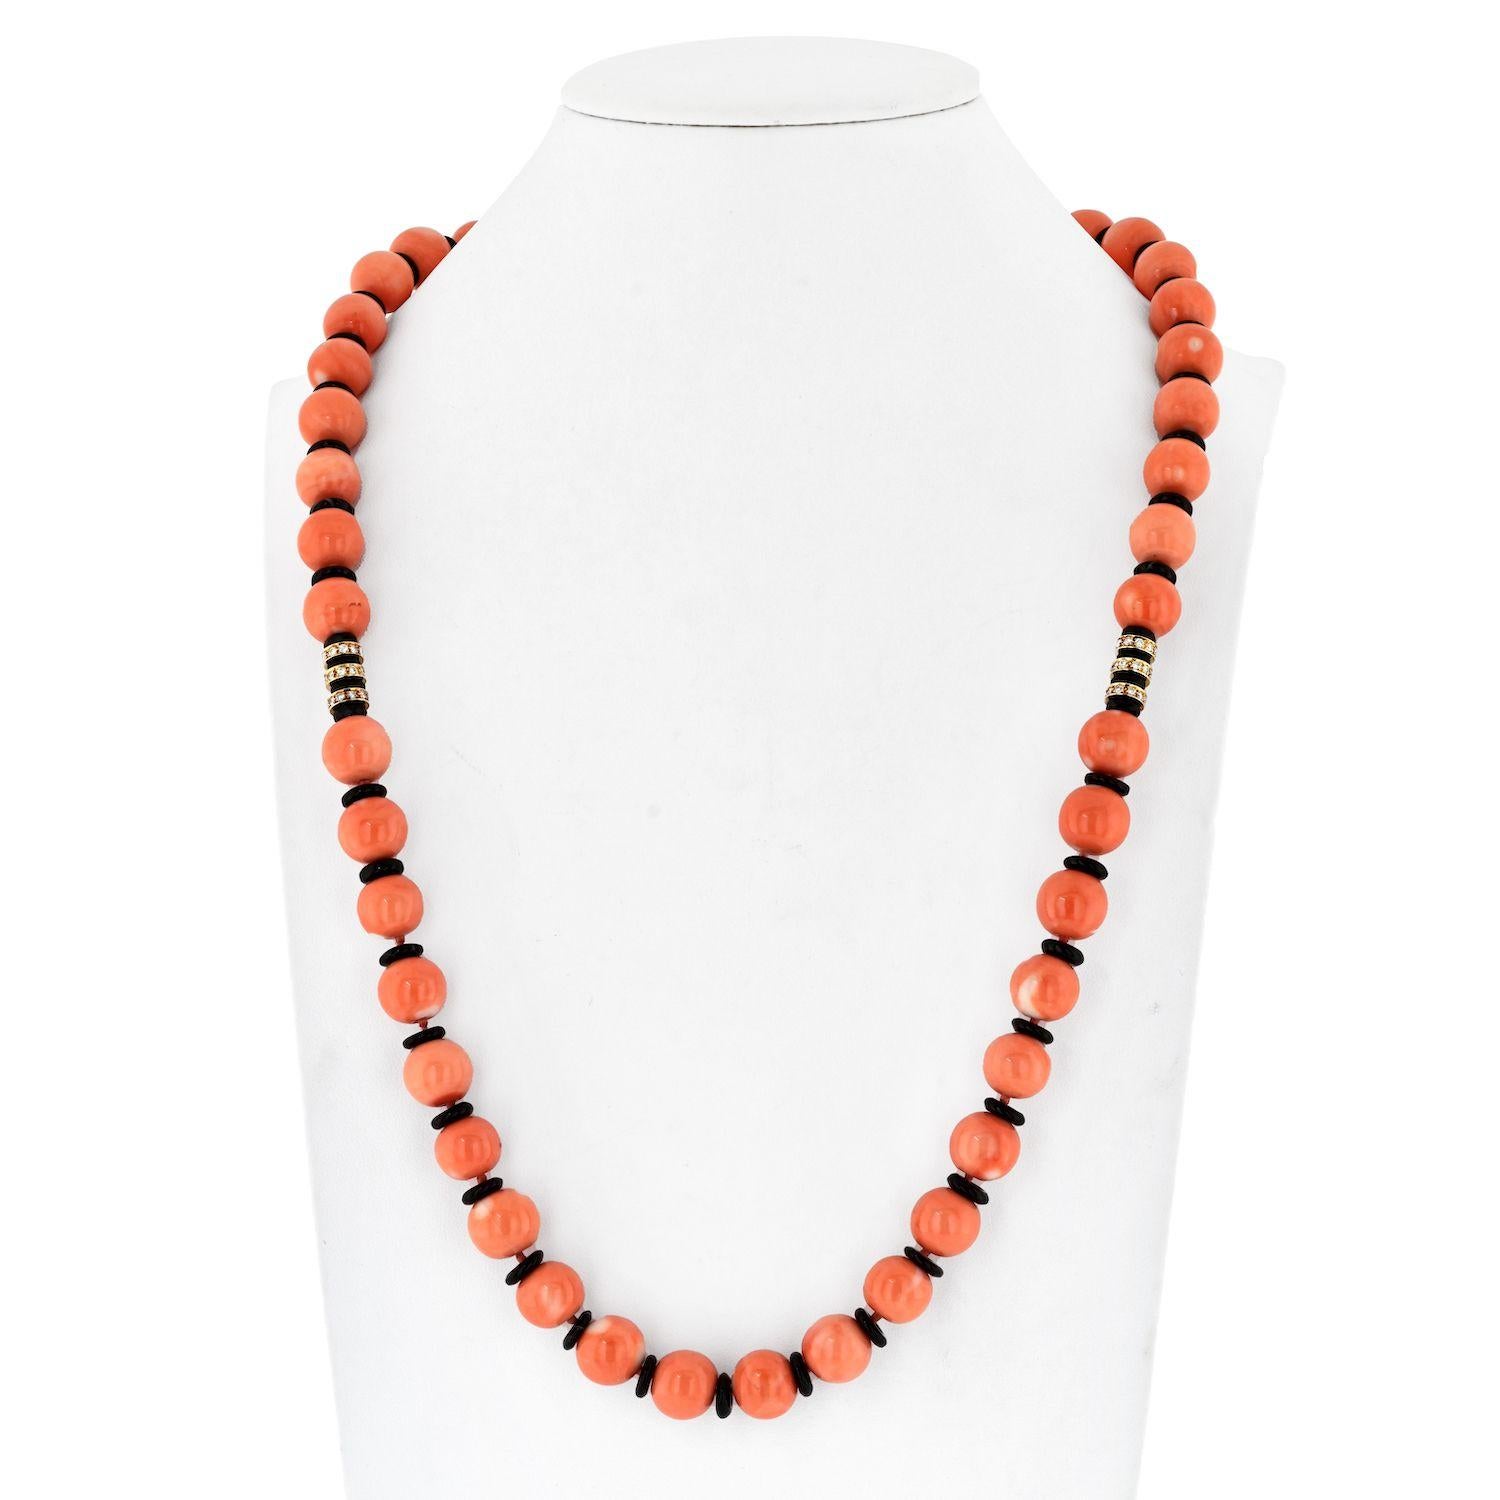 Bvlgari 18K Yellow Gold Coral, Diamond, Black Enamel Bead Necklace In Excellent Condition For Sale In New York, NY